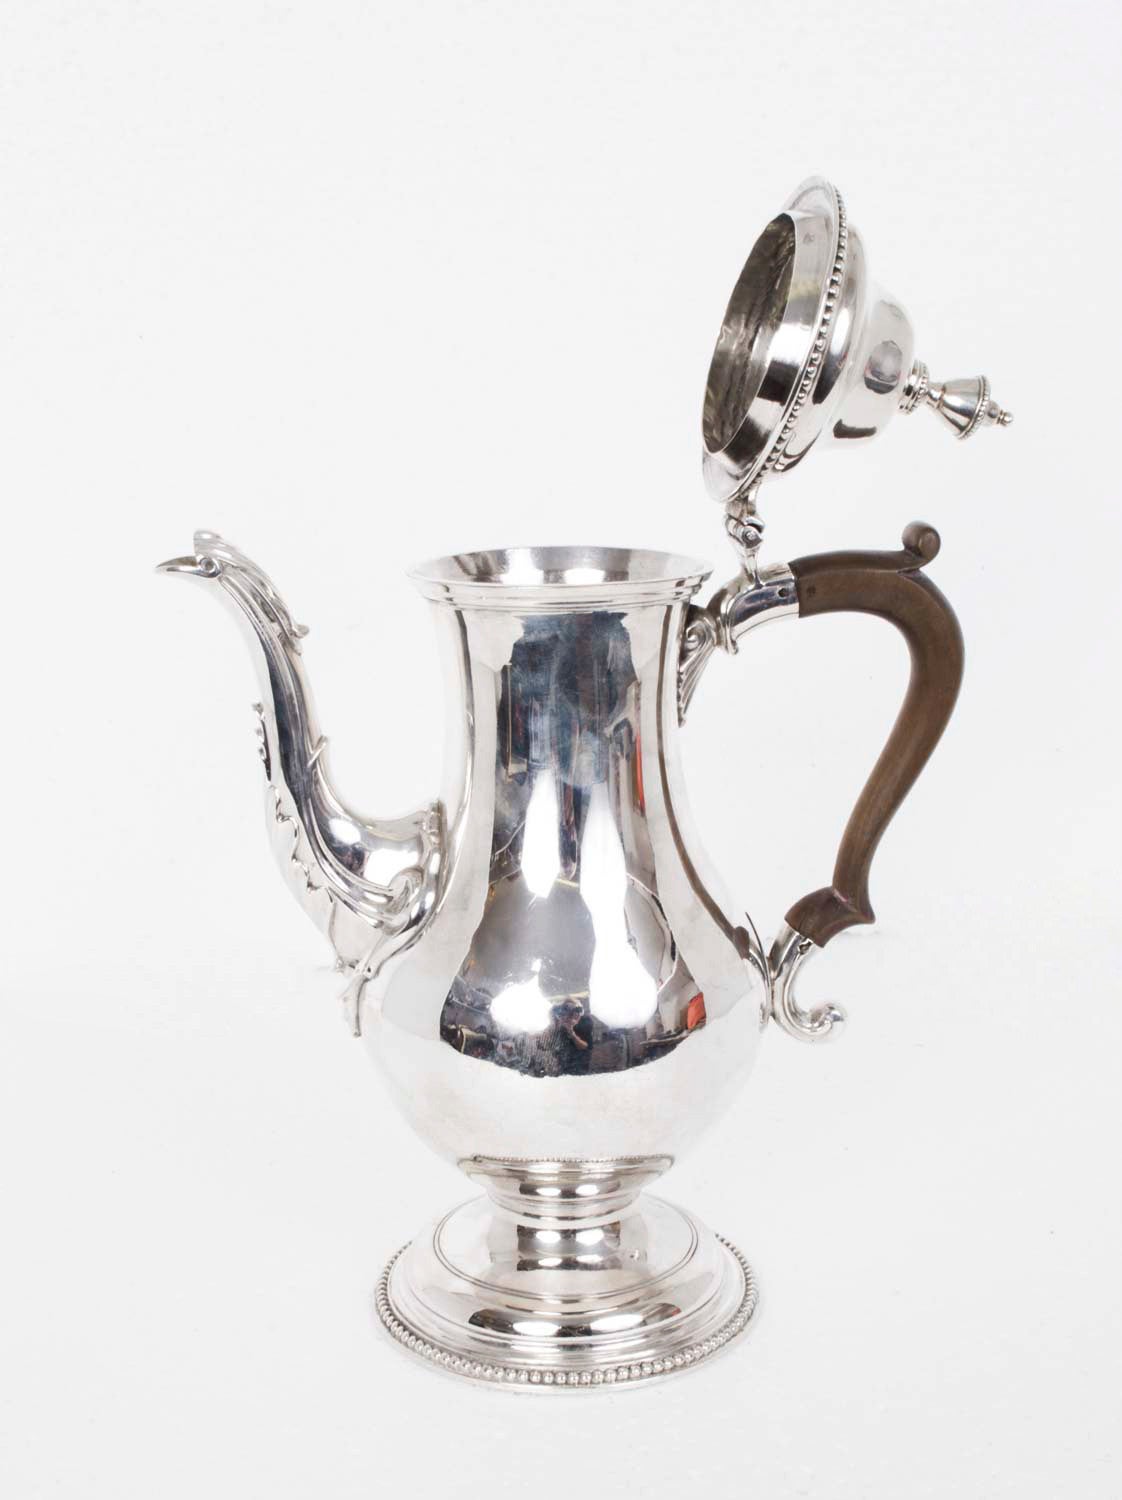 This is a wonderful antique sterling silver coffee pot by the celebrated silversmith Hester Bateman. 

It bears hallmarks for London 1775 and the makers mark of the world renowned silversmith Hester Bateman. 

It is beautifully made in sterling